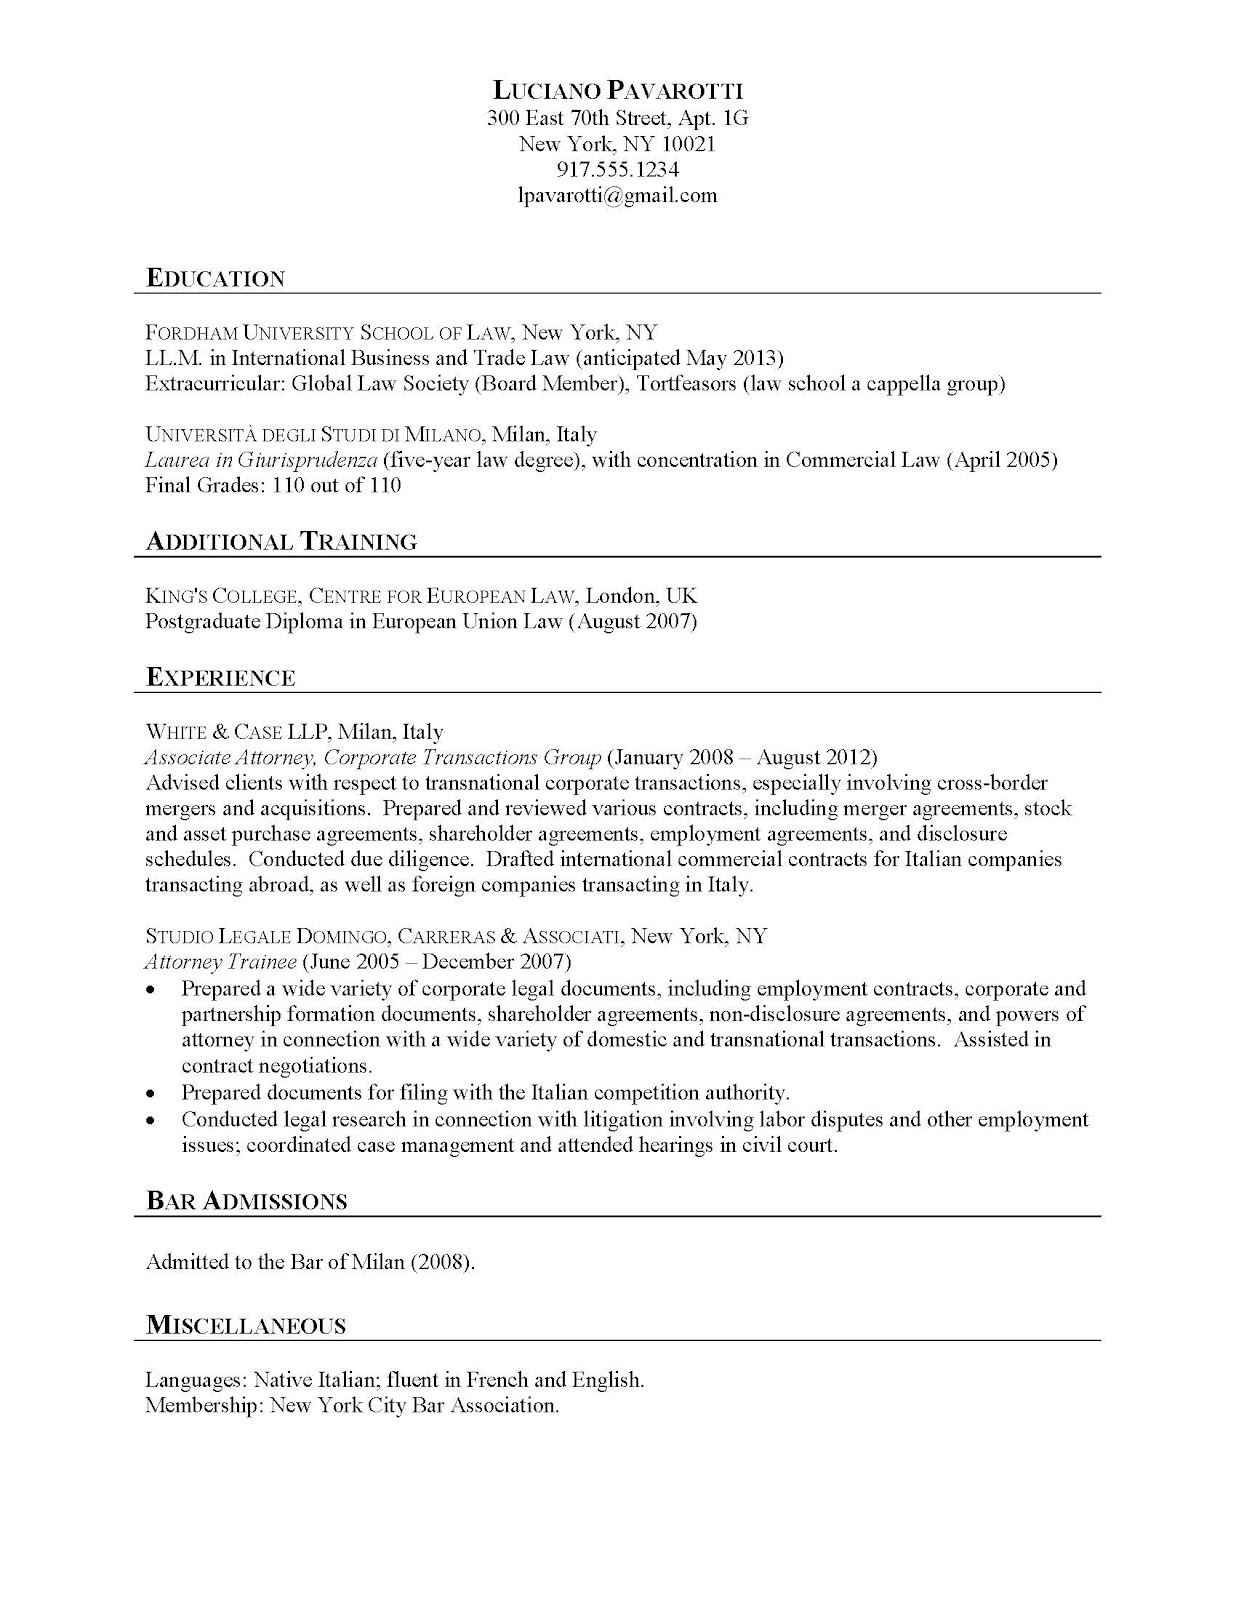 Hbs resume format template